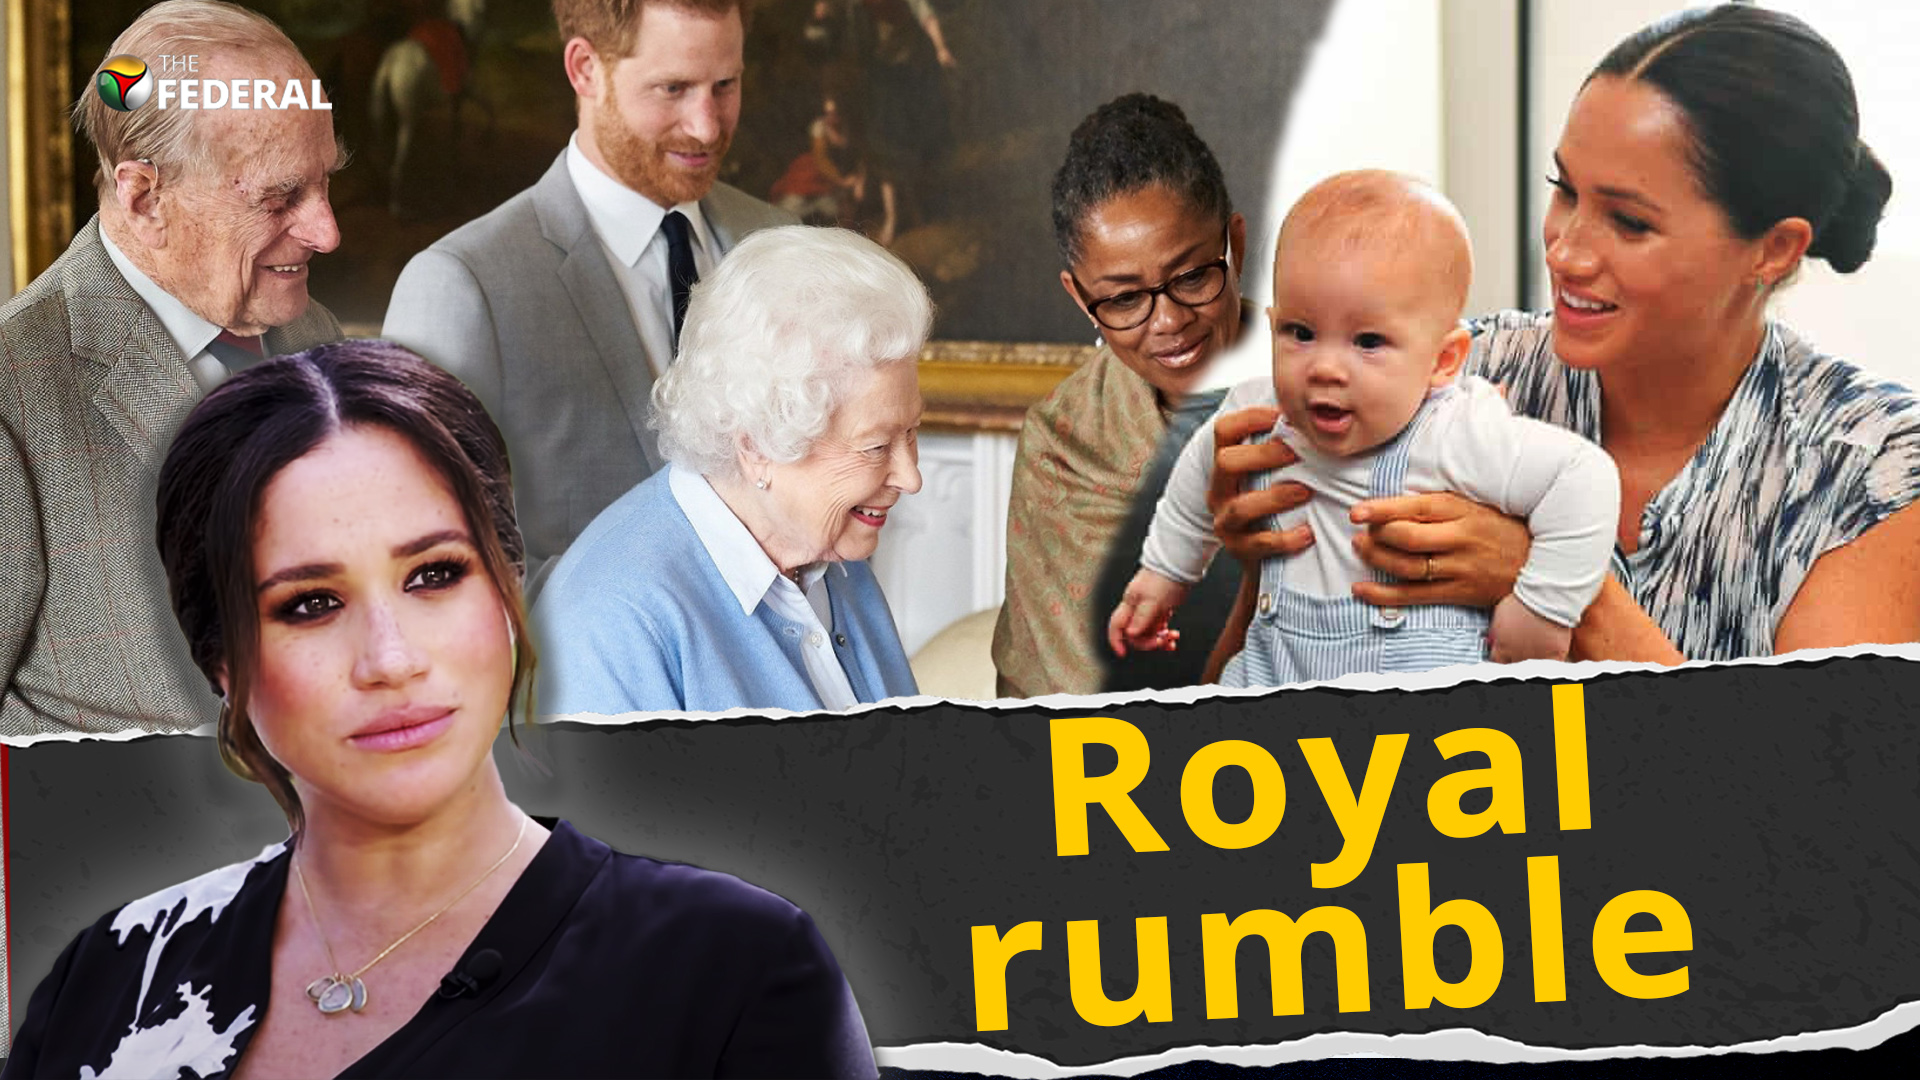 As Meghan-Harry’s interview triggers debate, her father rubbishes allegations against royal family